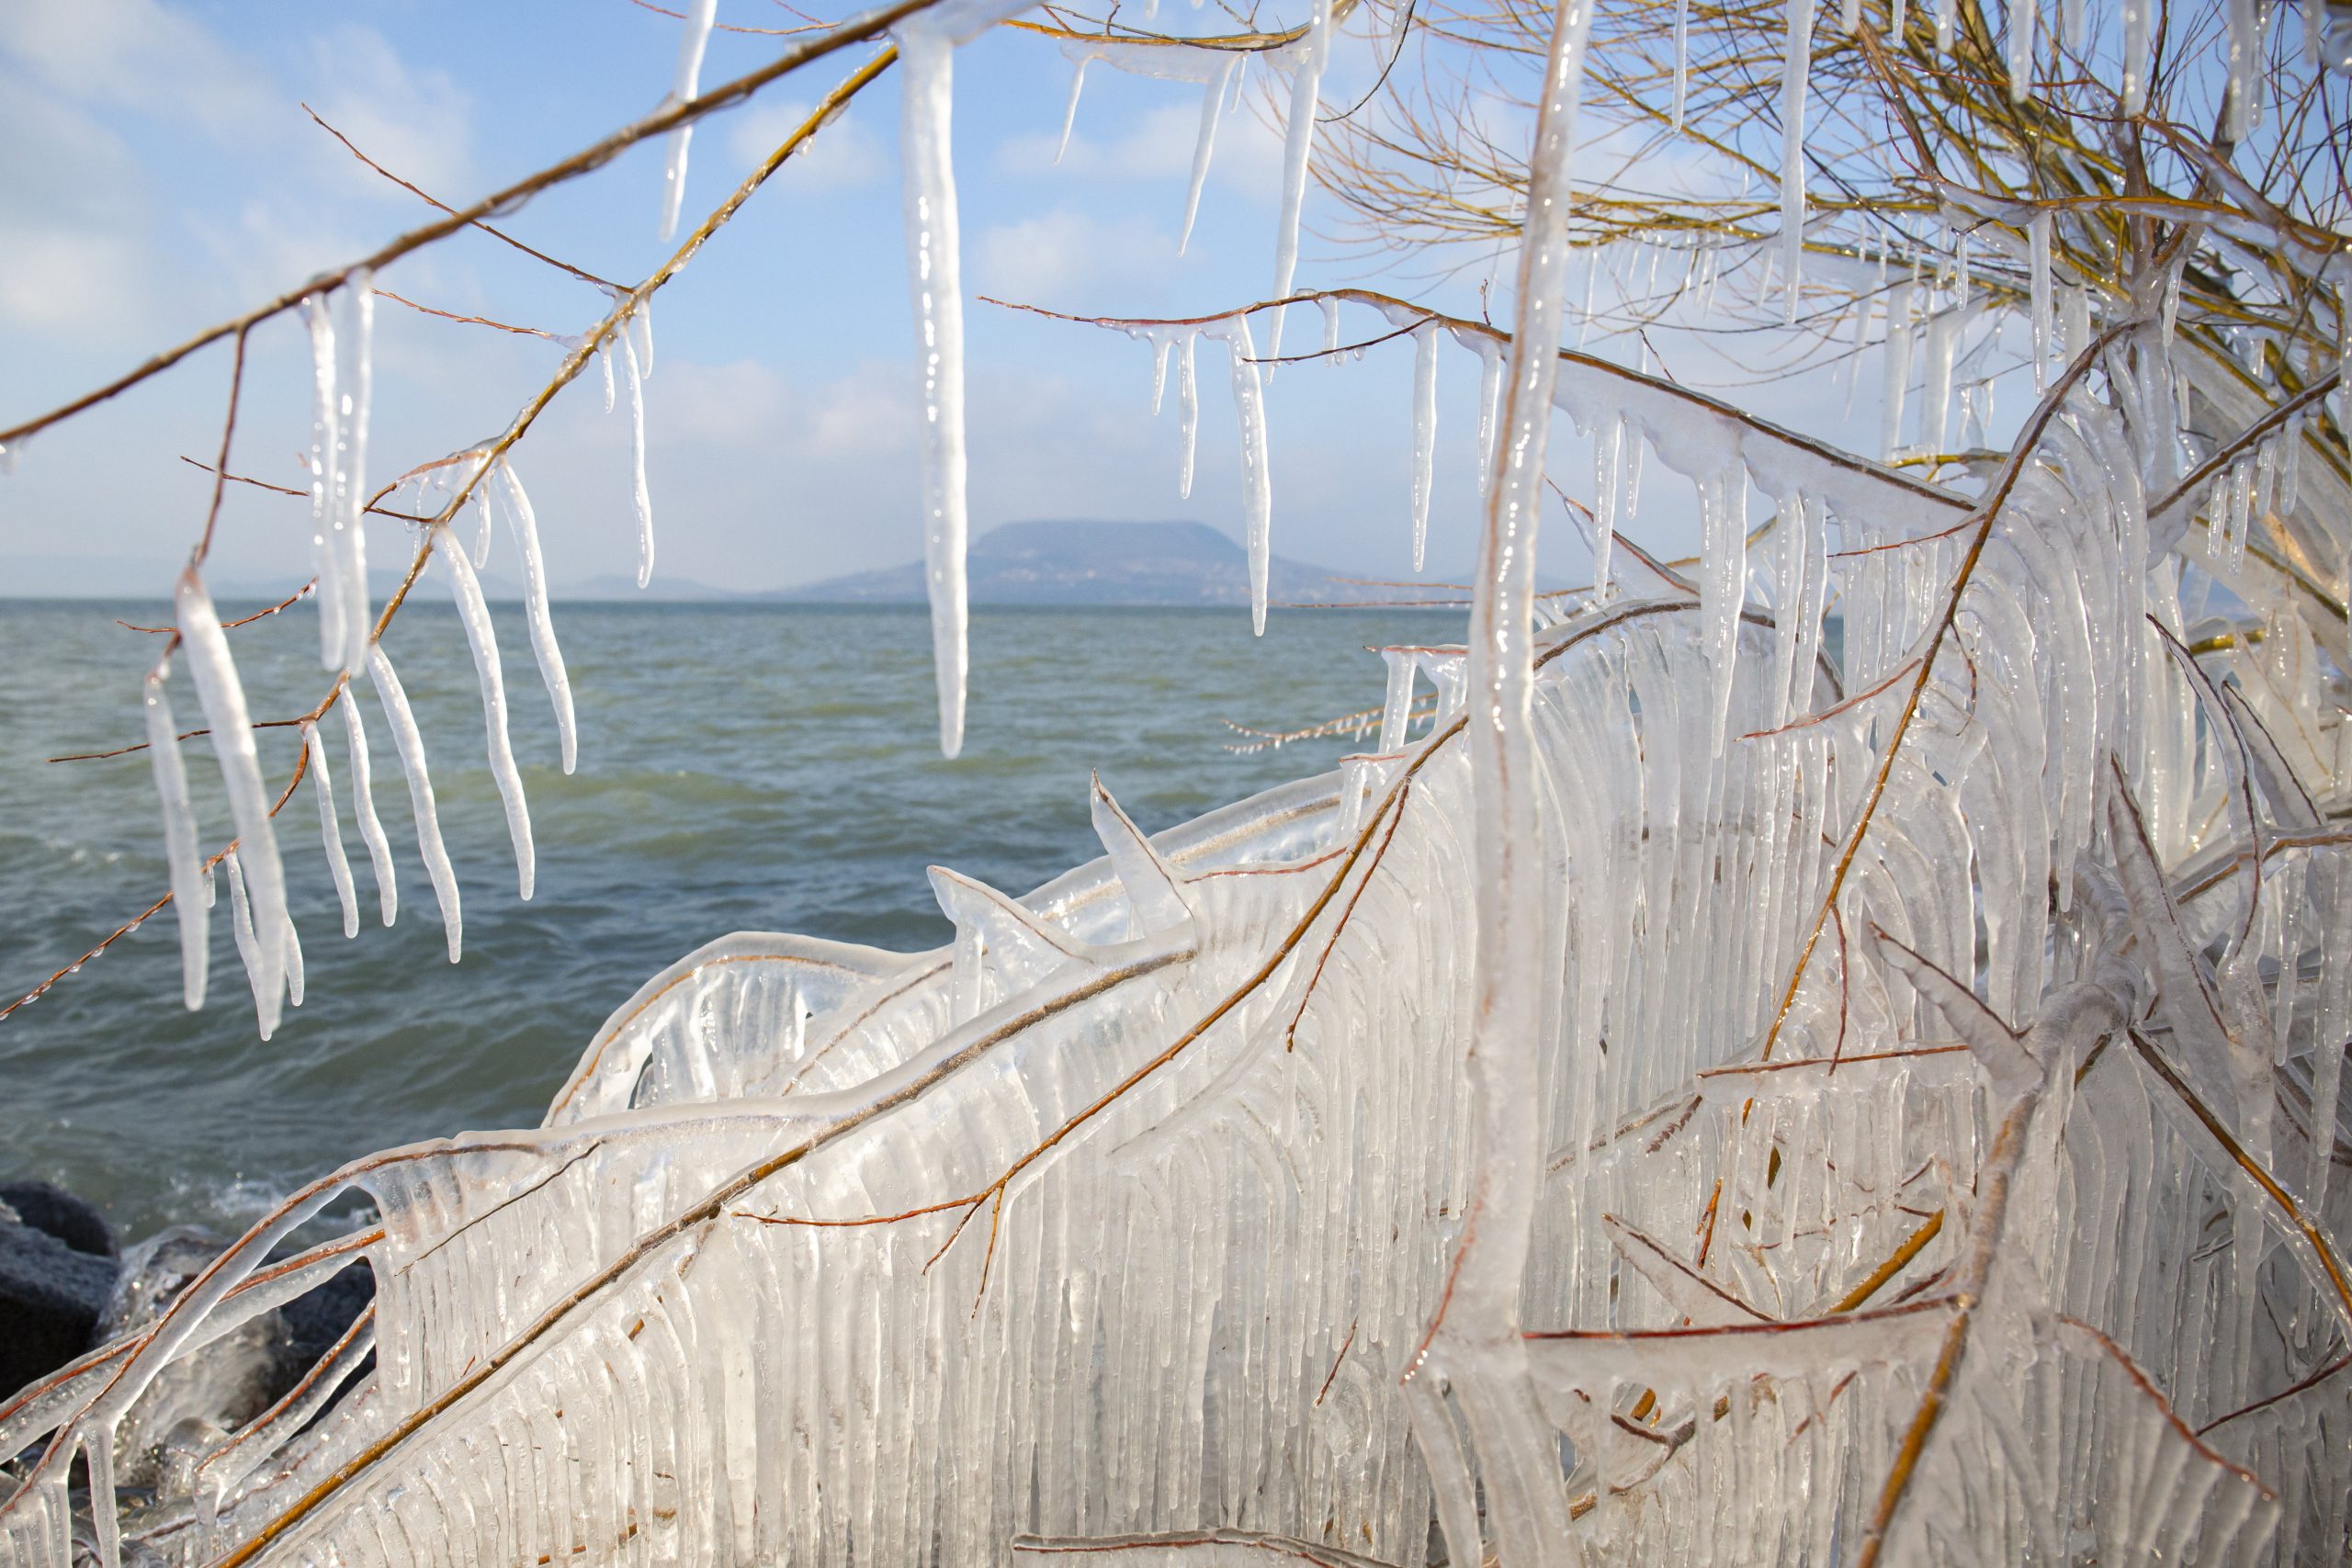 Lake Balaton Still Popular in Winter, But Its True Potential Remains Untapped